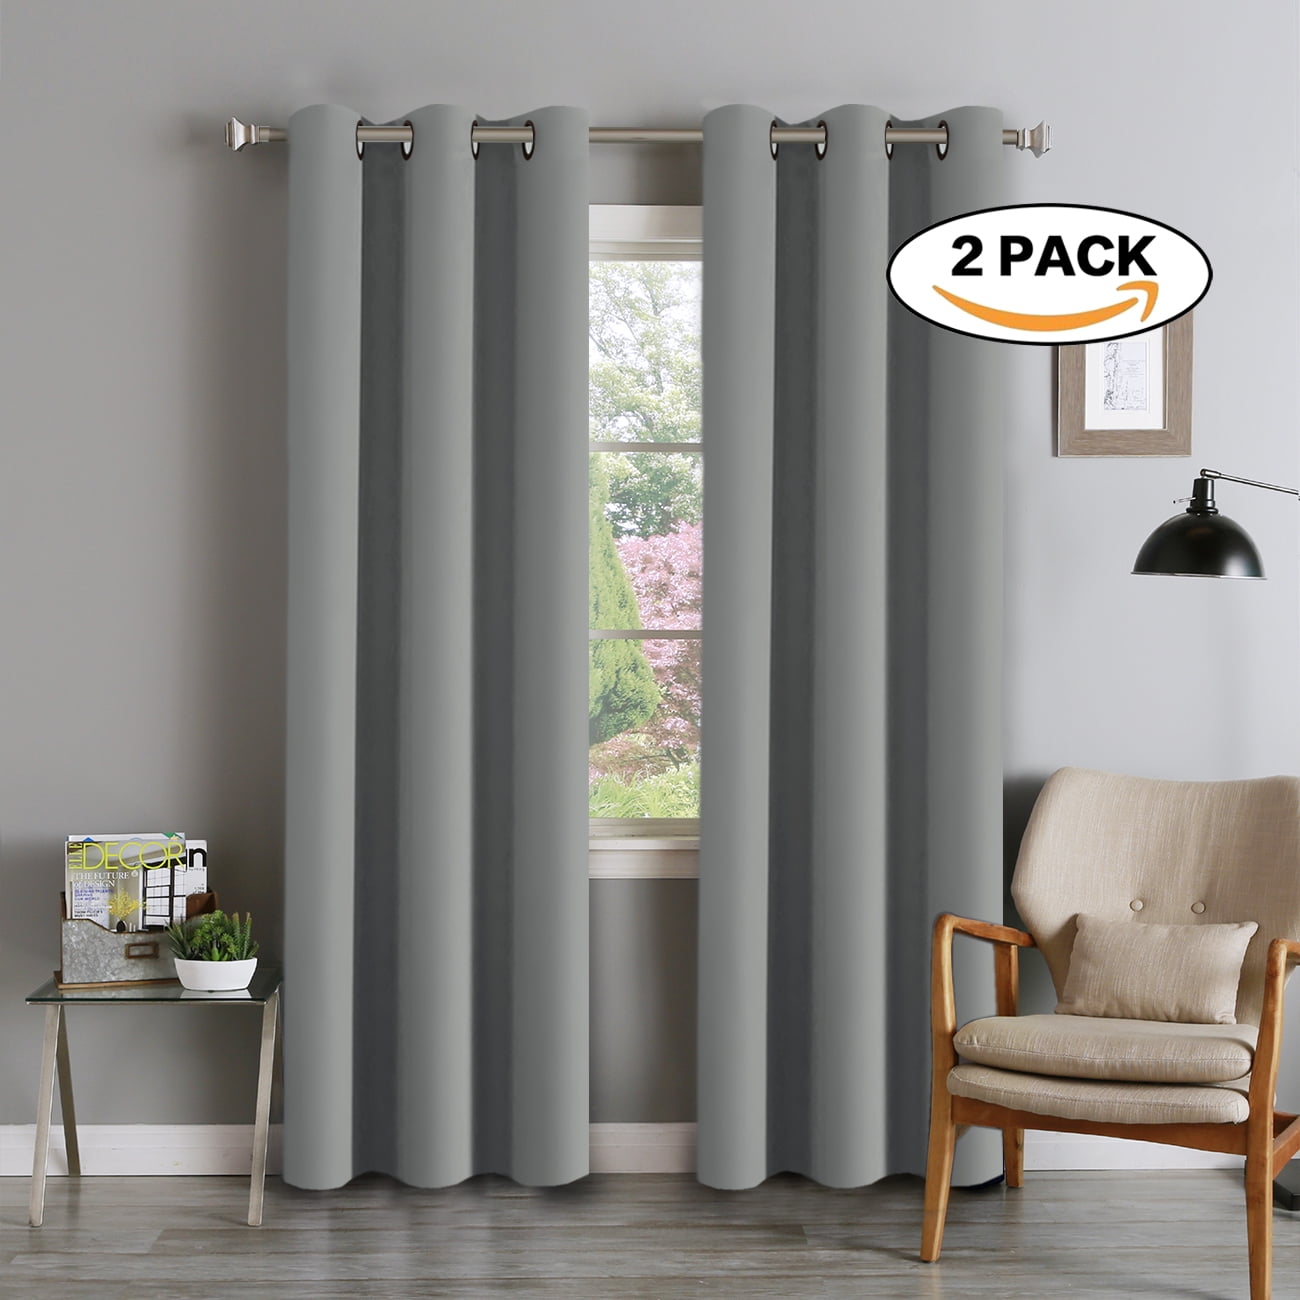 Room Curtain Pair Blackout Pencil Pleat Heavy Thick Thermal Soundproof Windproof 